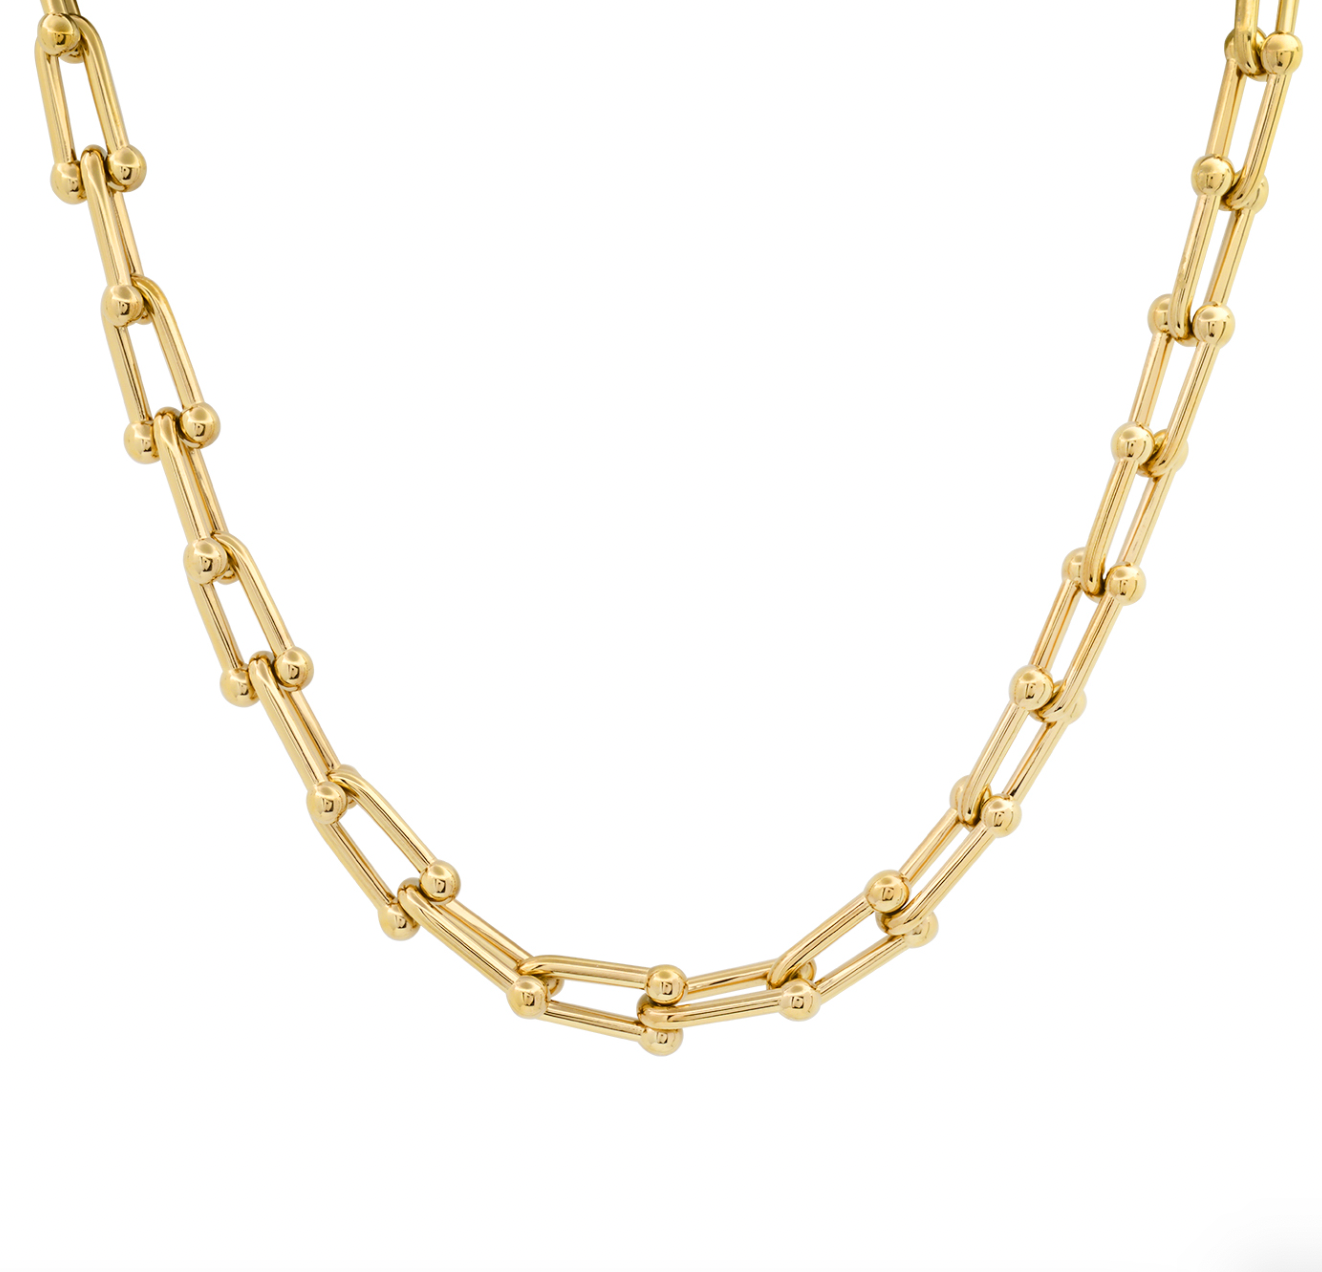 TAI CHAIN LINK NECKLACE